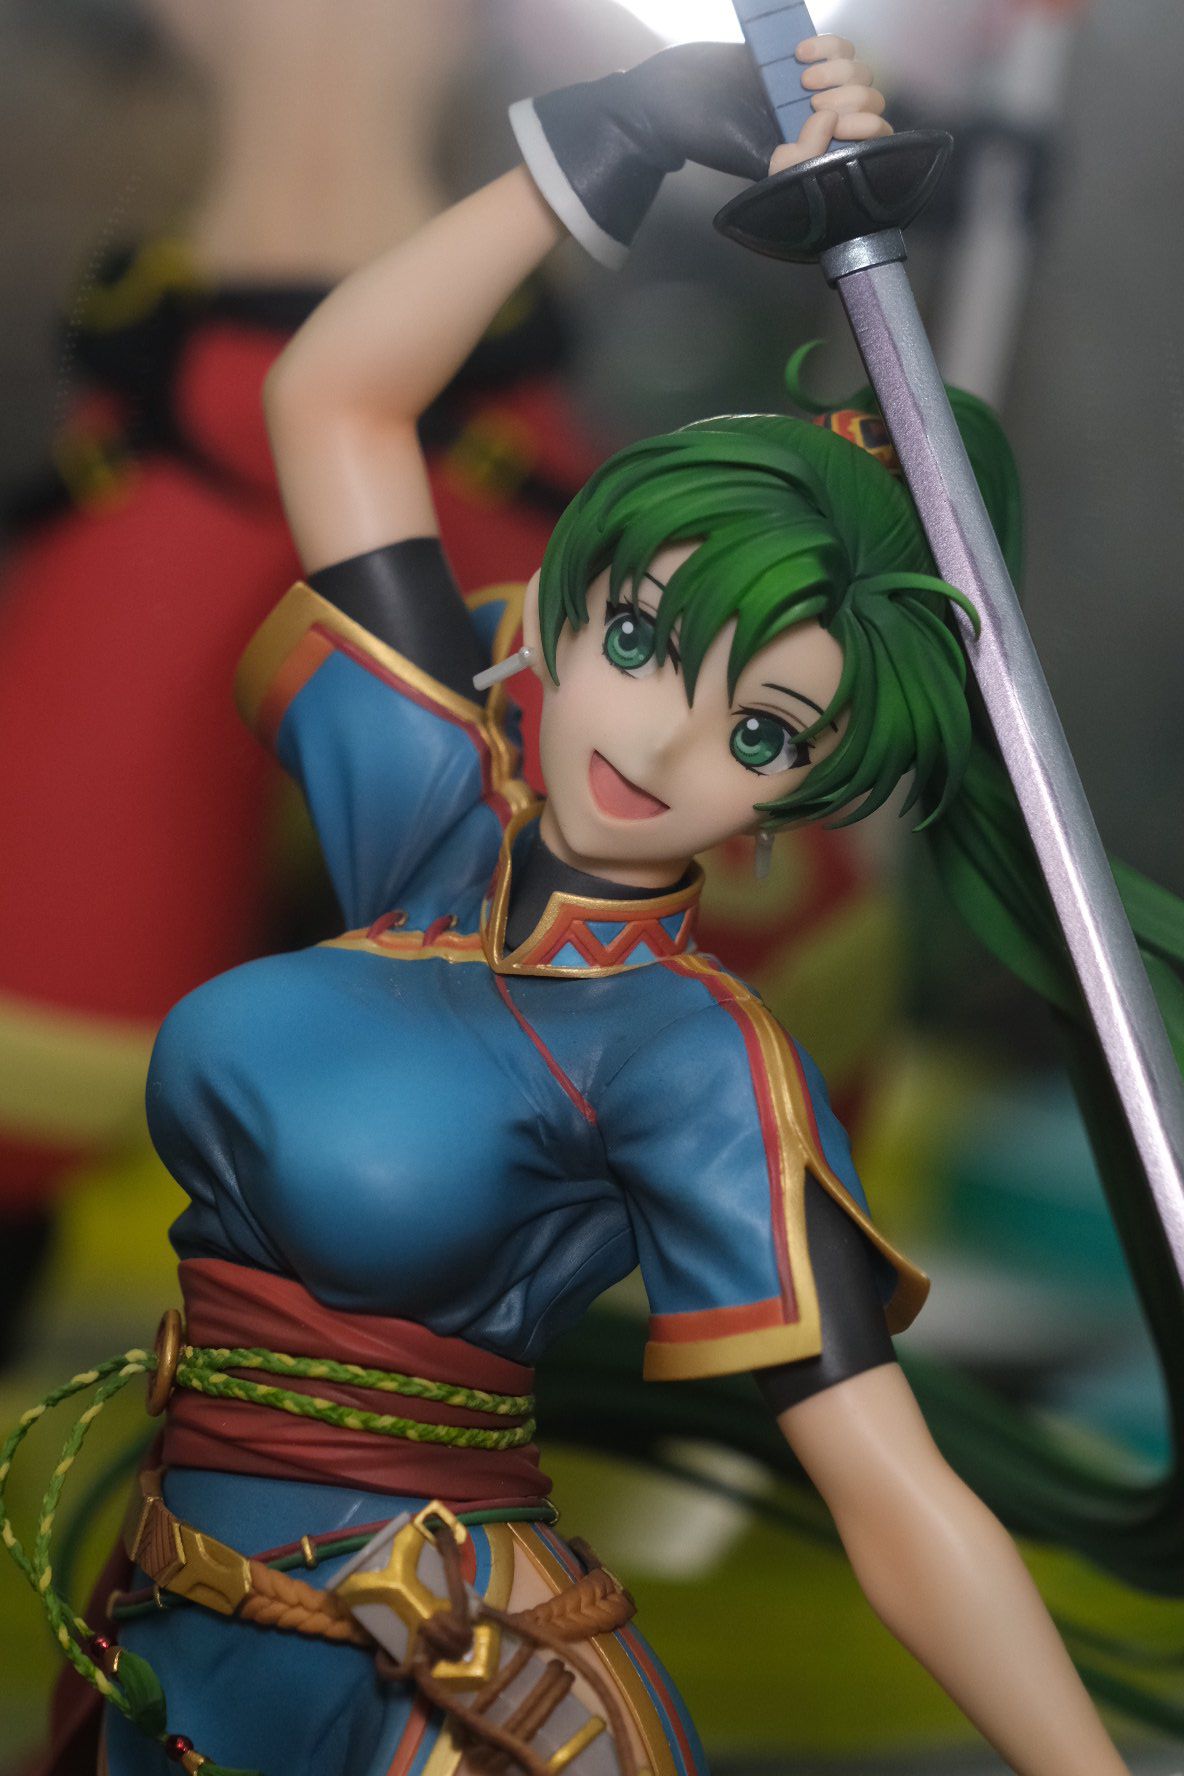 [Sad news] Fire Emblem will release a figure that is too erotic 1